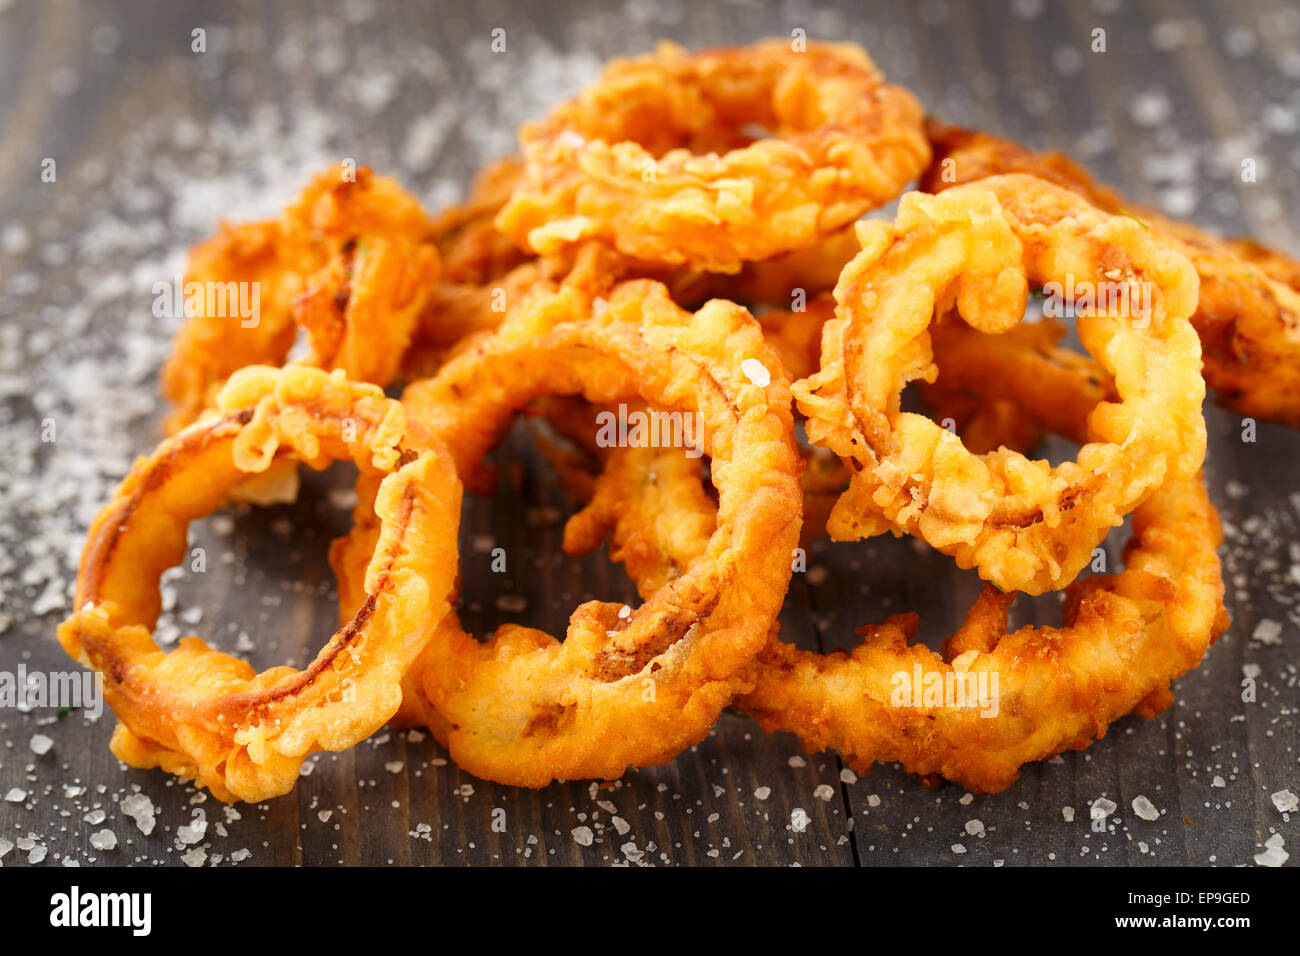 Homemade crunchy fried onion rings on a table Stock Photo